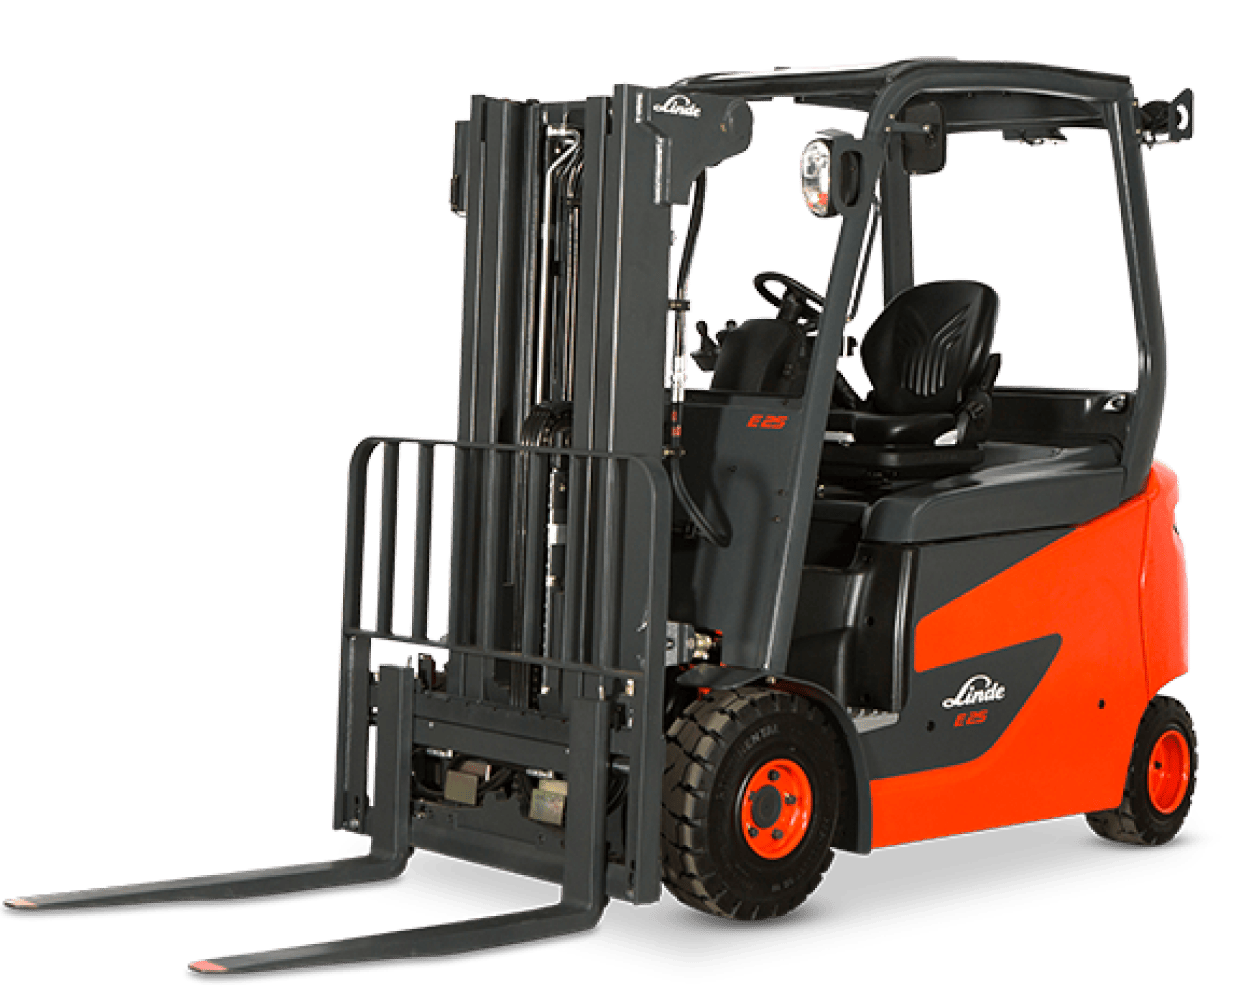 Linde Linde E25 Electric Counterbalance Forklift Truck/ 5.9 Meters Lift Height 